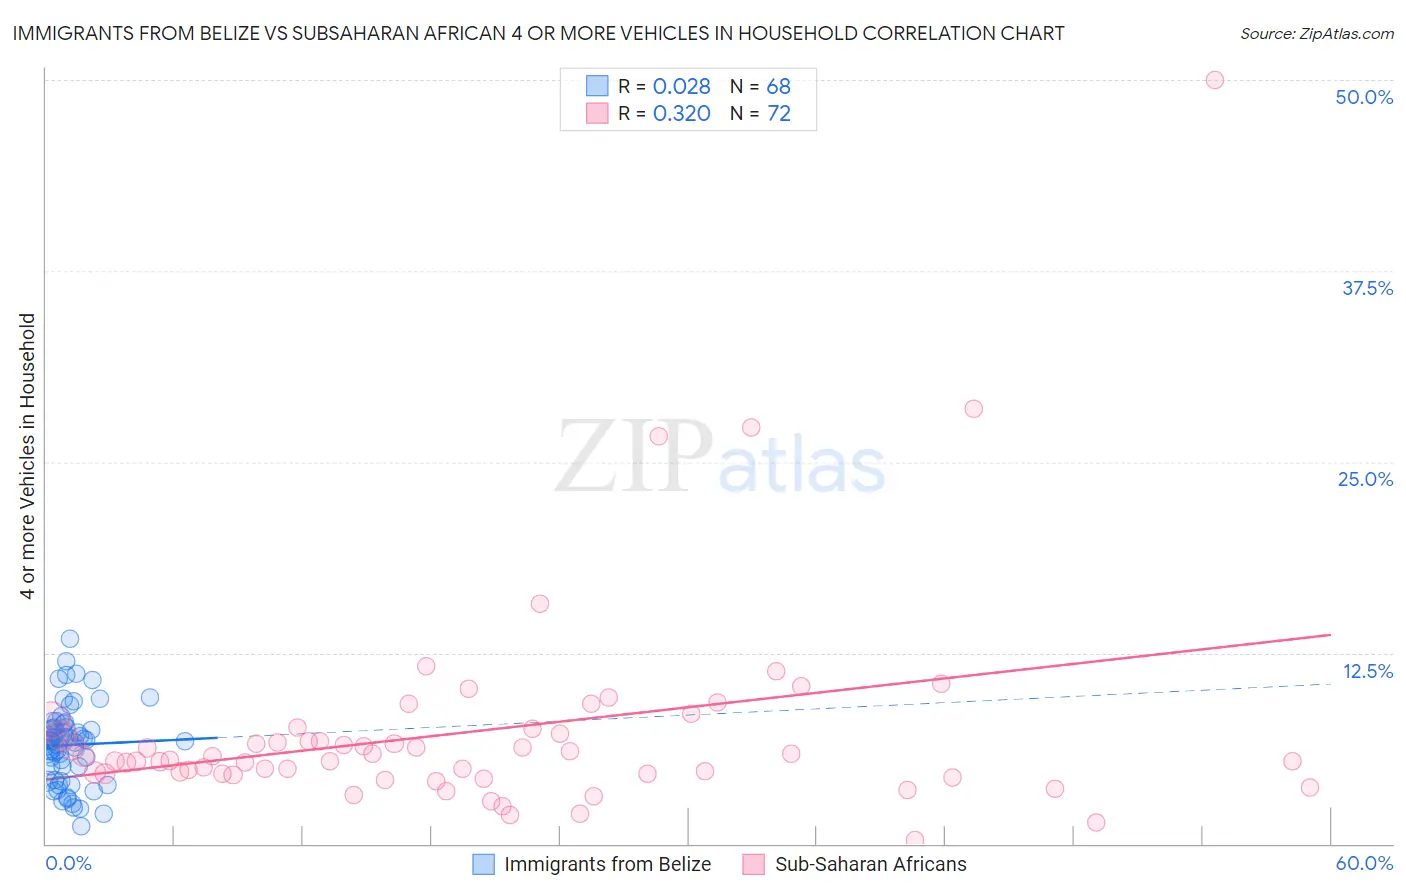 Immigrants from Belize vs Subsaharan African 4 or more Vehicles in Household